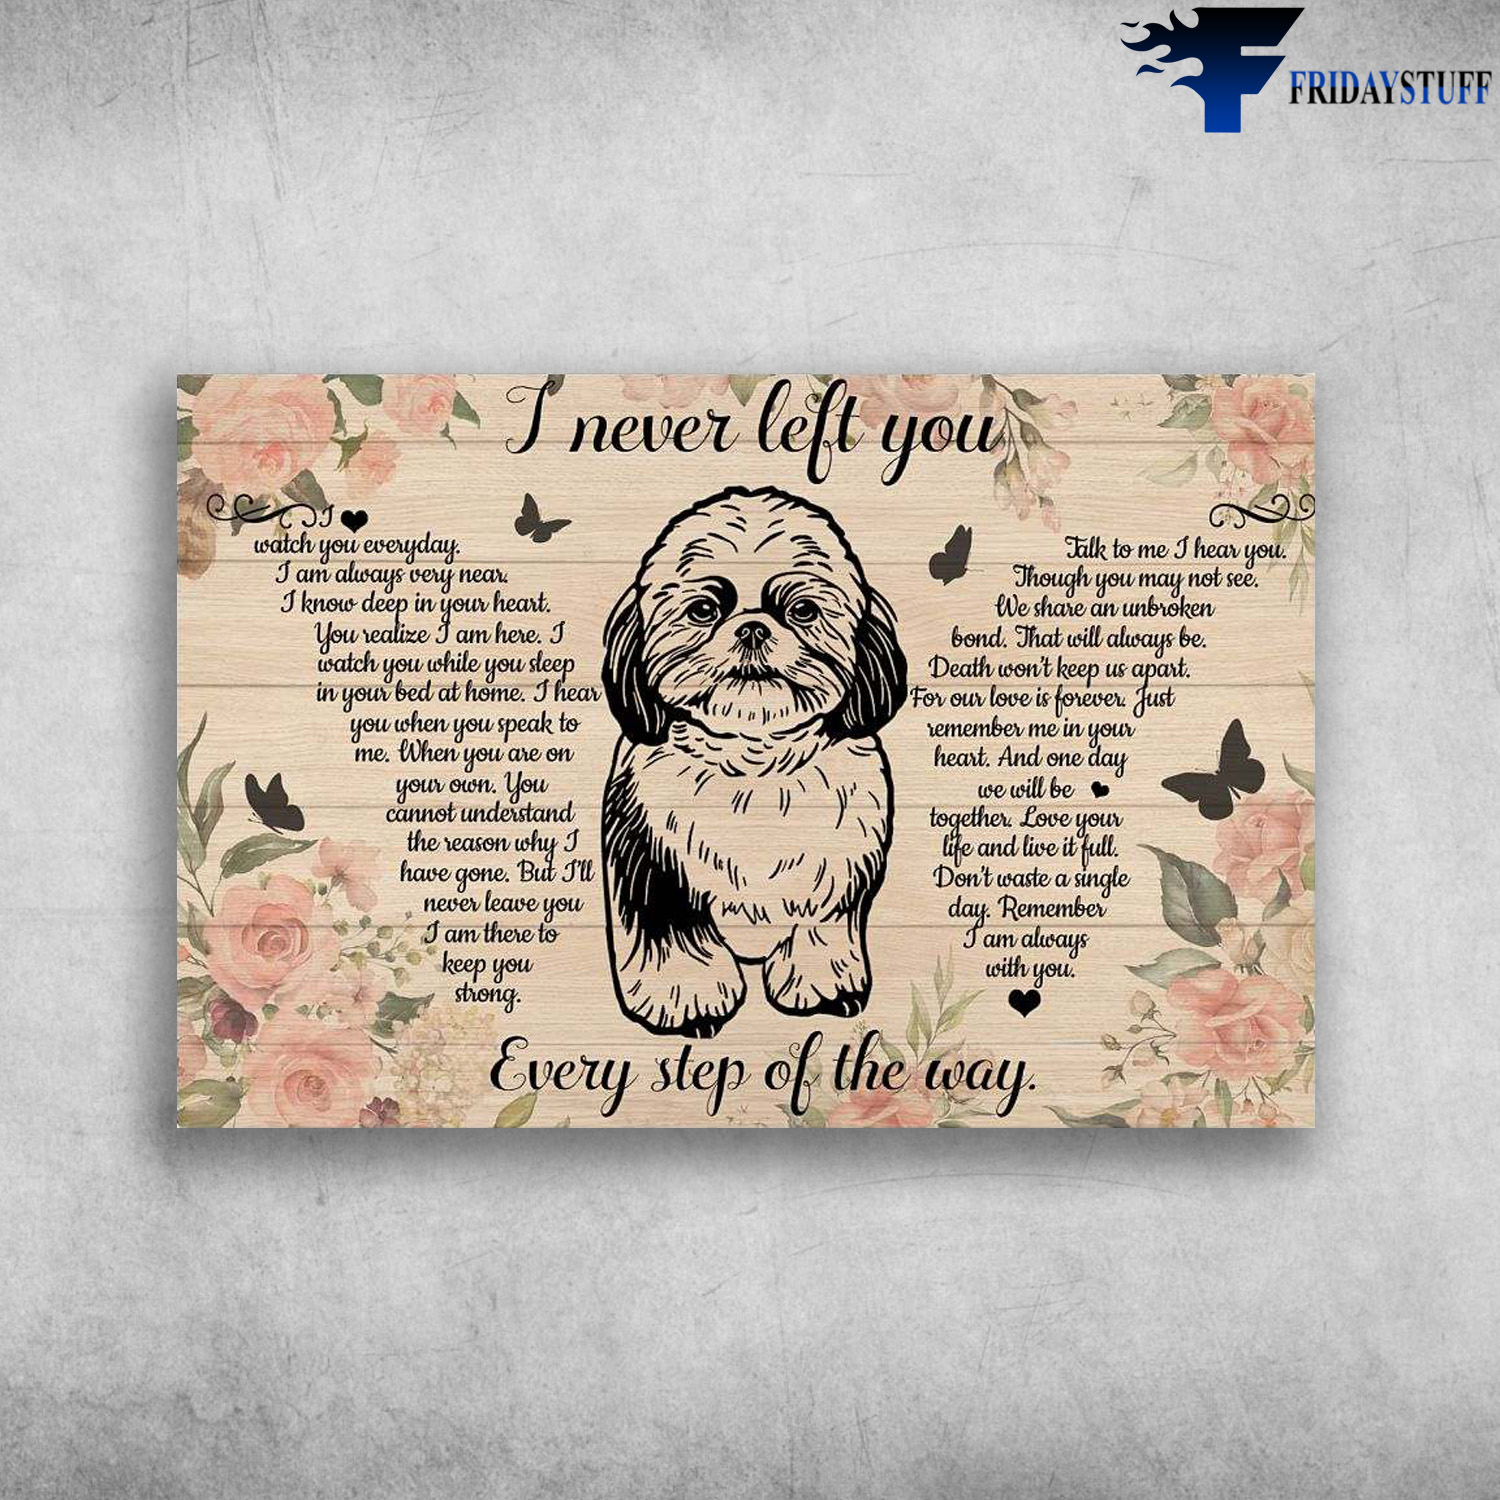 ShihTzu Dog – I Never Left You, I Watch You Everyday, I Am Always Every Near, I Know Deep In Your Heart, You Realize I Am Here, I Watch You While You Sleep, In Your Bed At Home, I Hear You Whe You Speak To Me, Everyday Step Of The Way